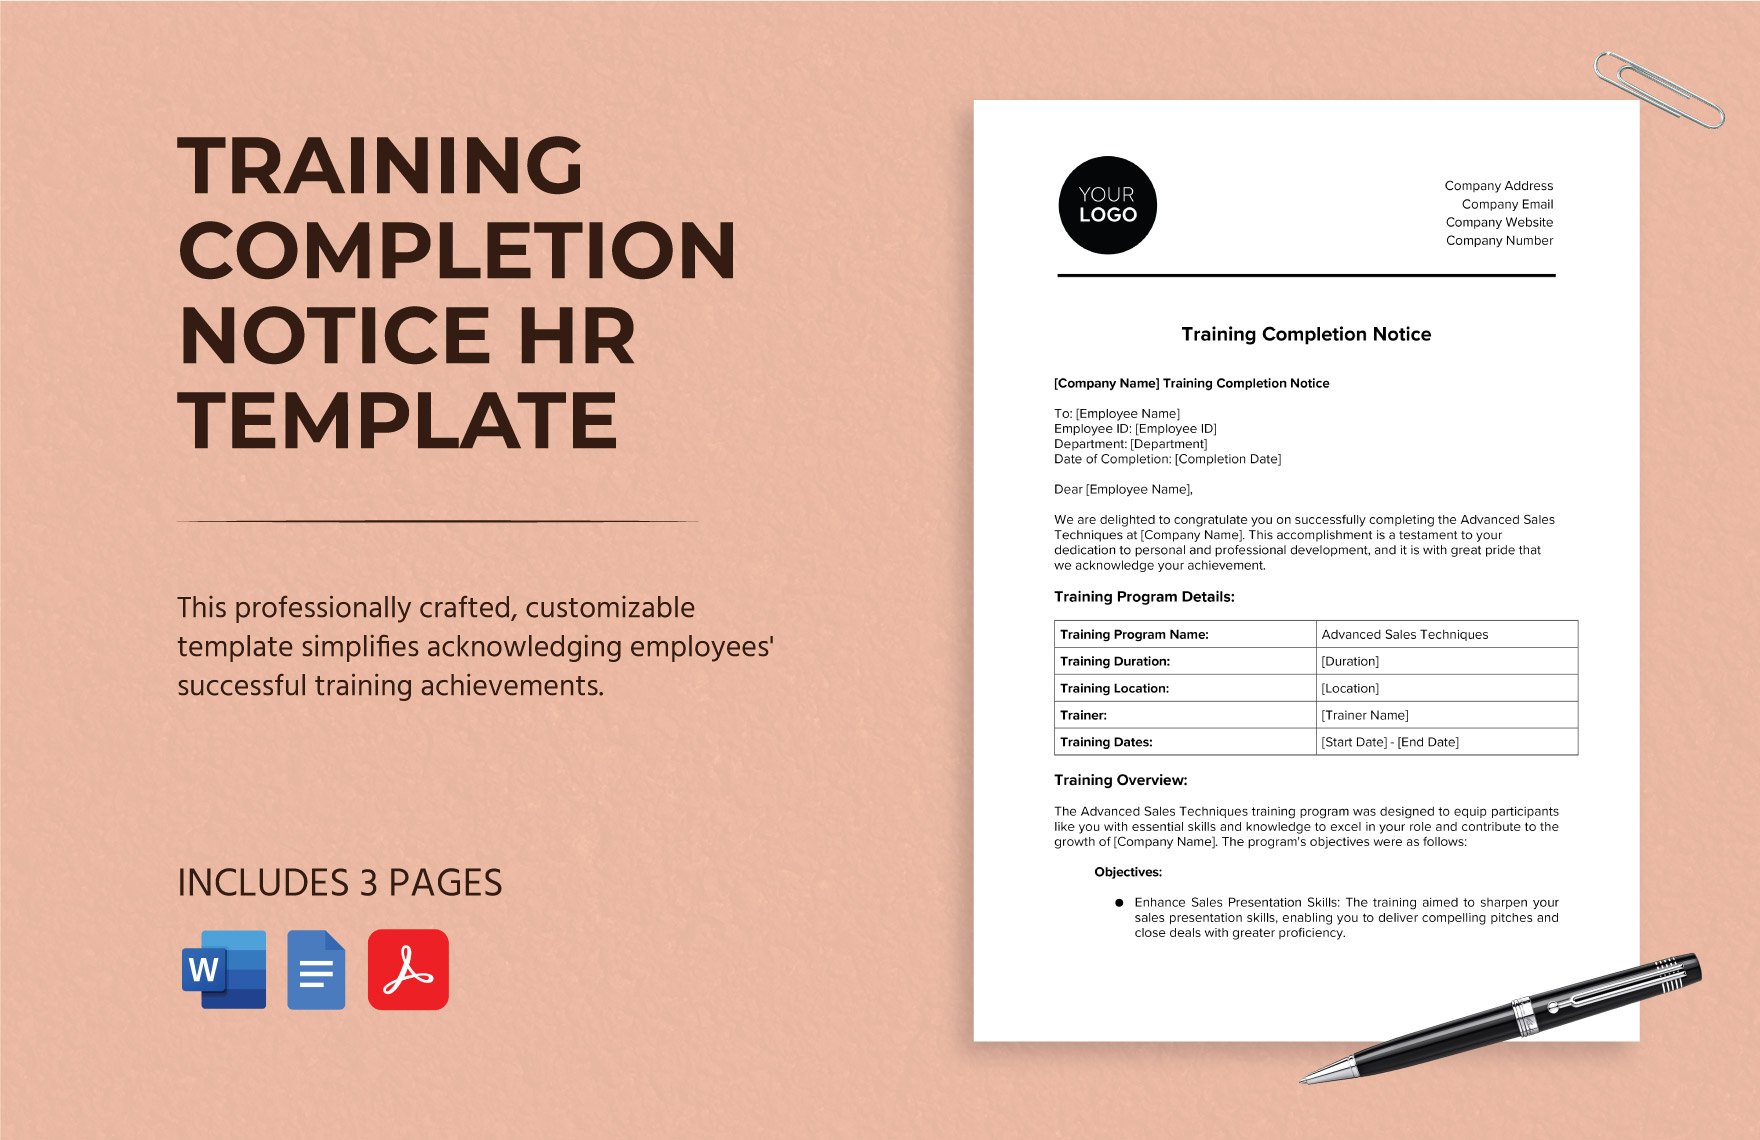 Training Completion Notice HR Template in Word, Google Docs, PDF